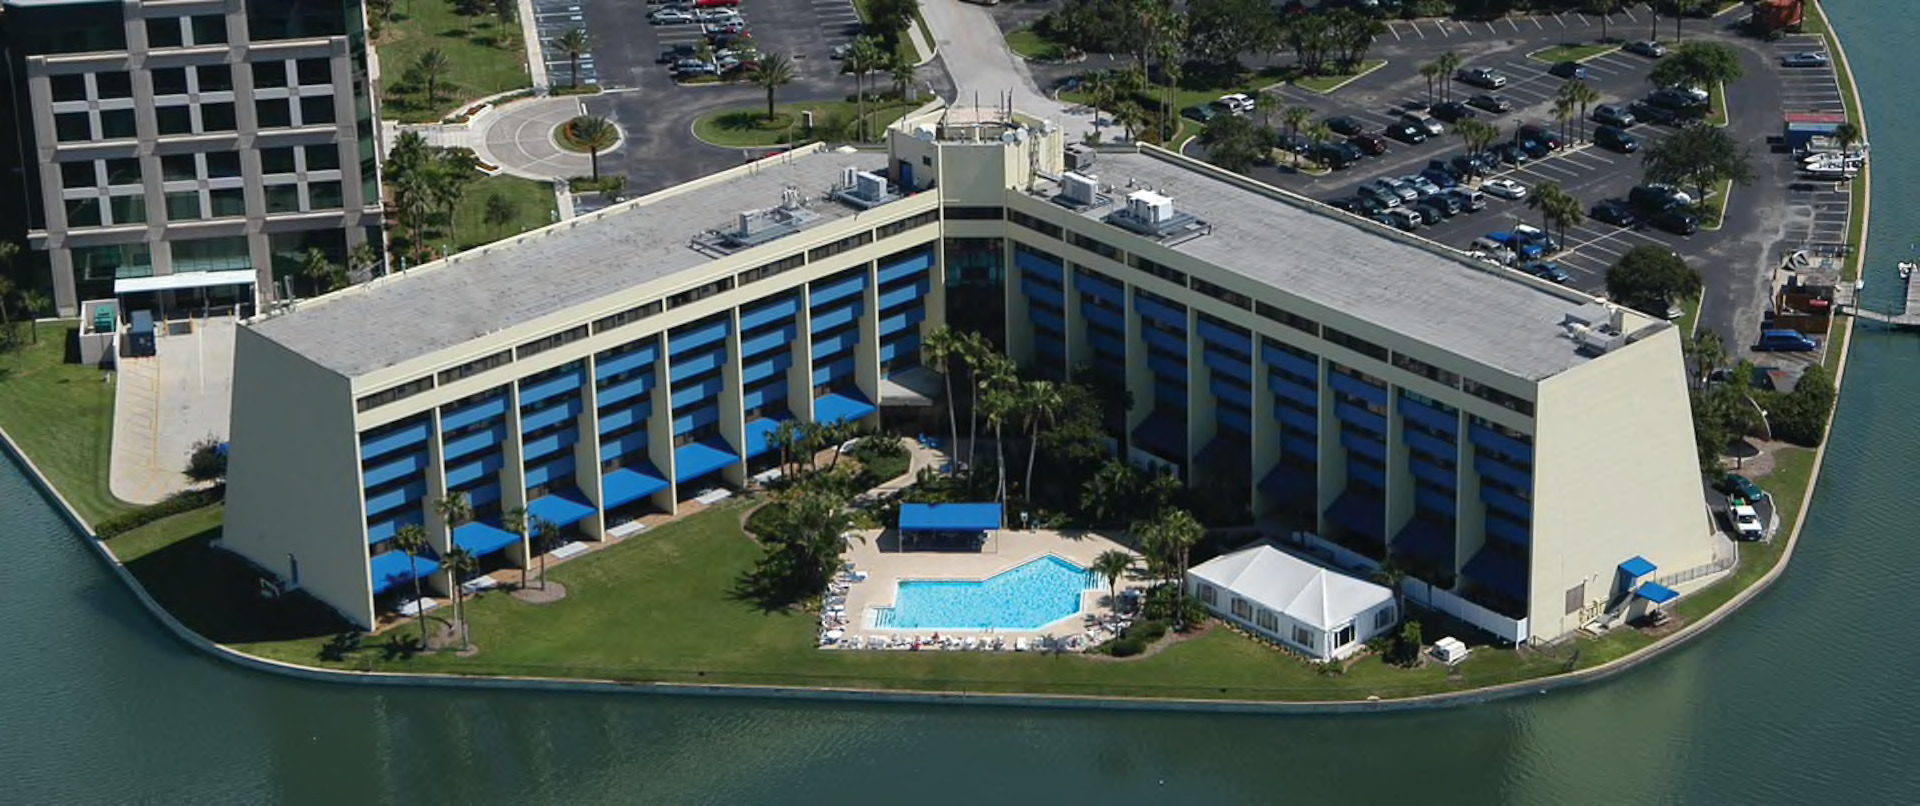 Photo of The DoubleTree by Hilton Tampa Rocky Point Waterfront, Tampa, FL